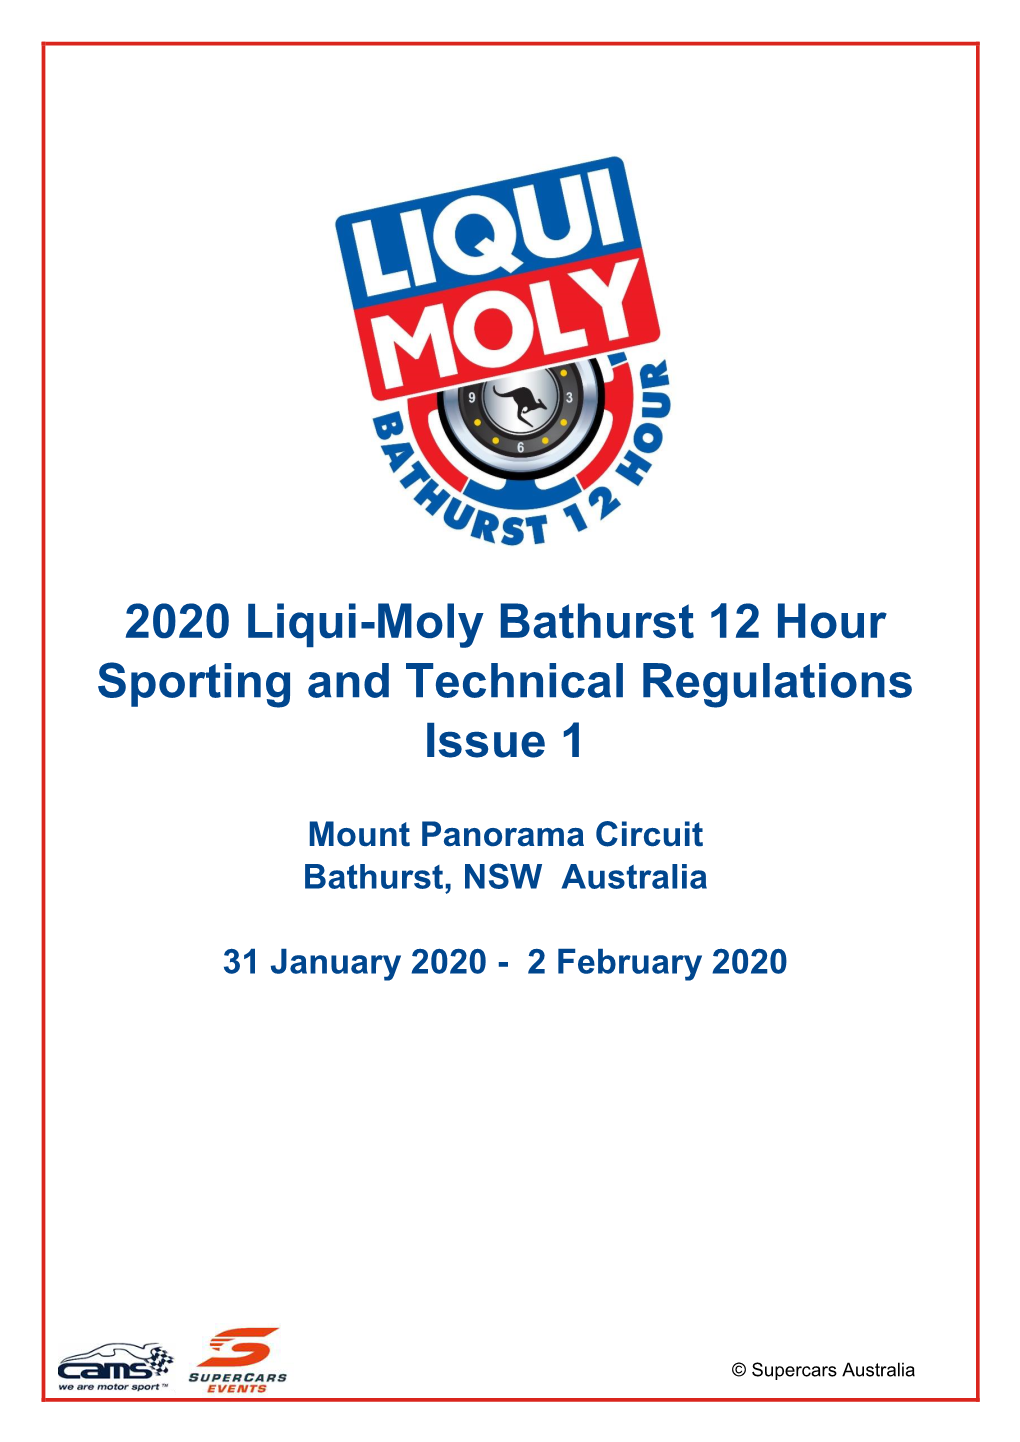 2020 Liqui-Moly Bathurst 12 Hour Sporting and Technical Regulations Issue 1